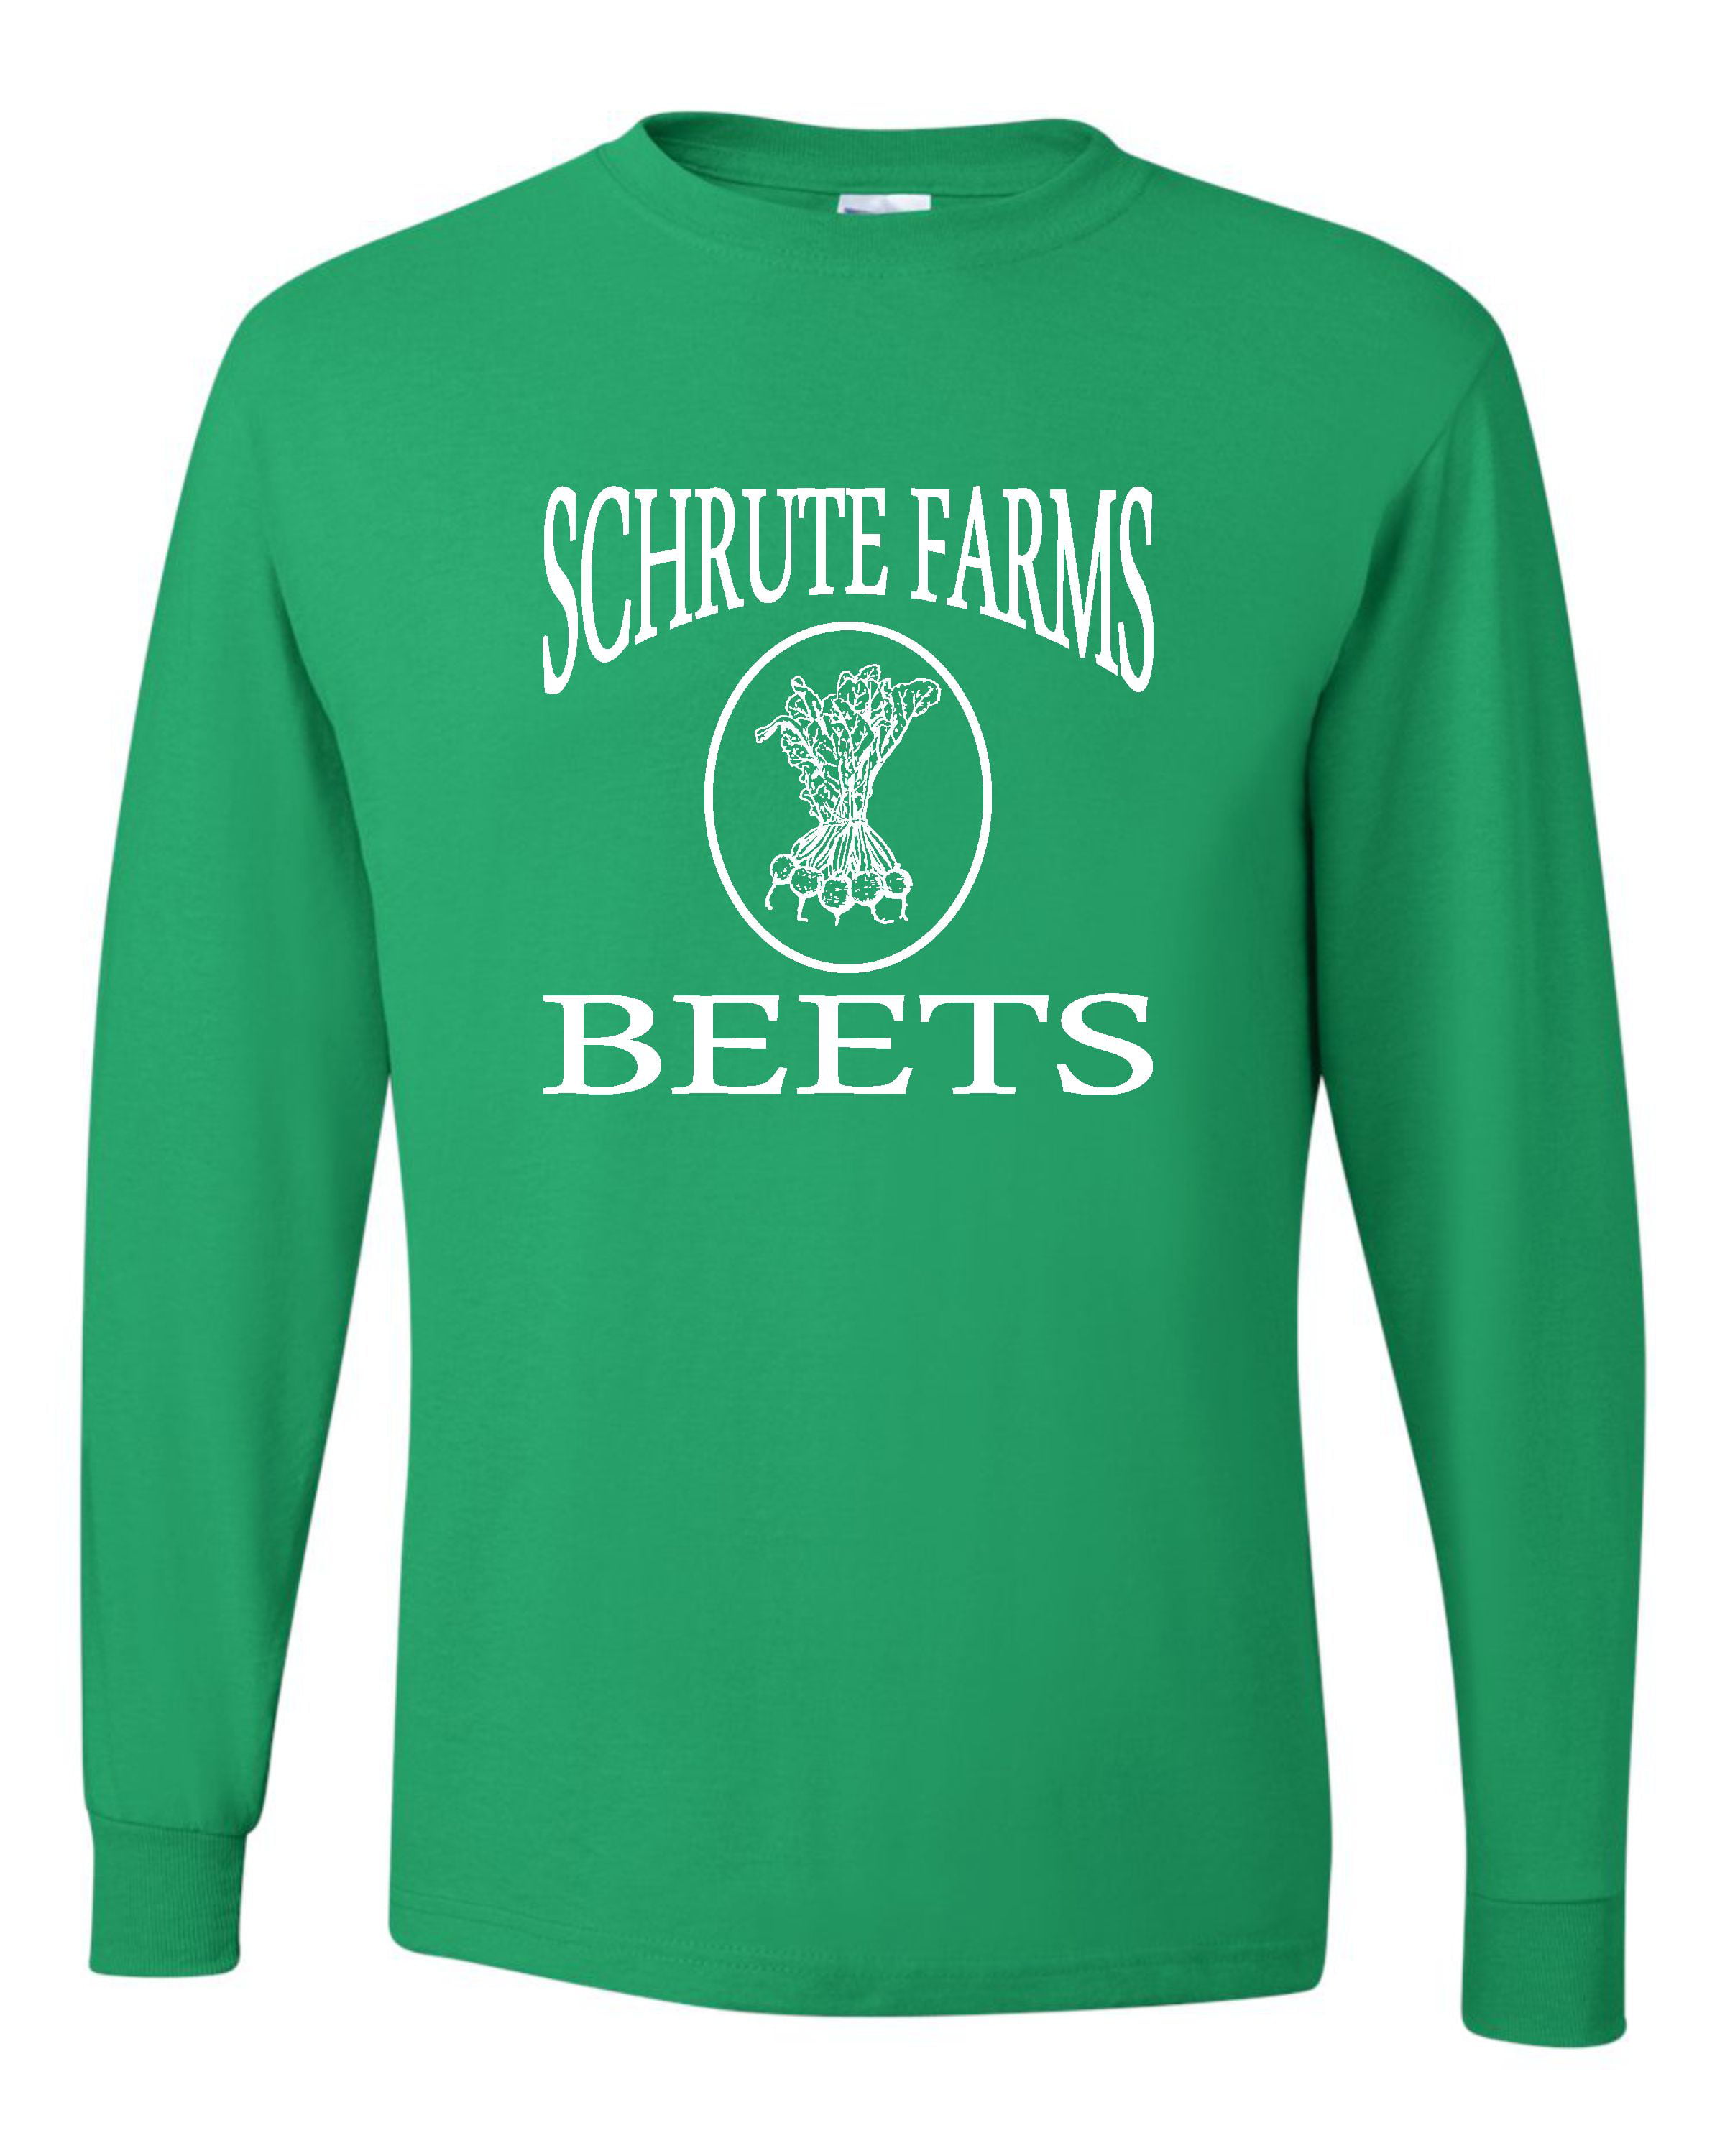 DFGHJZH-L Schrute Farms Beets Mens Casual Adult Long Sleeve T Shirts 